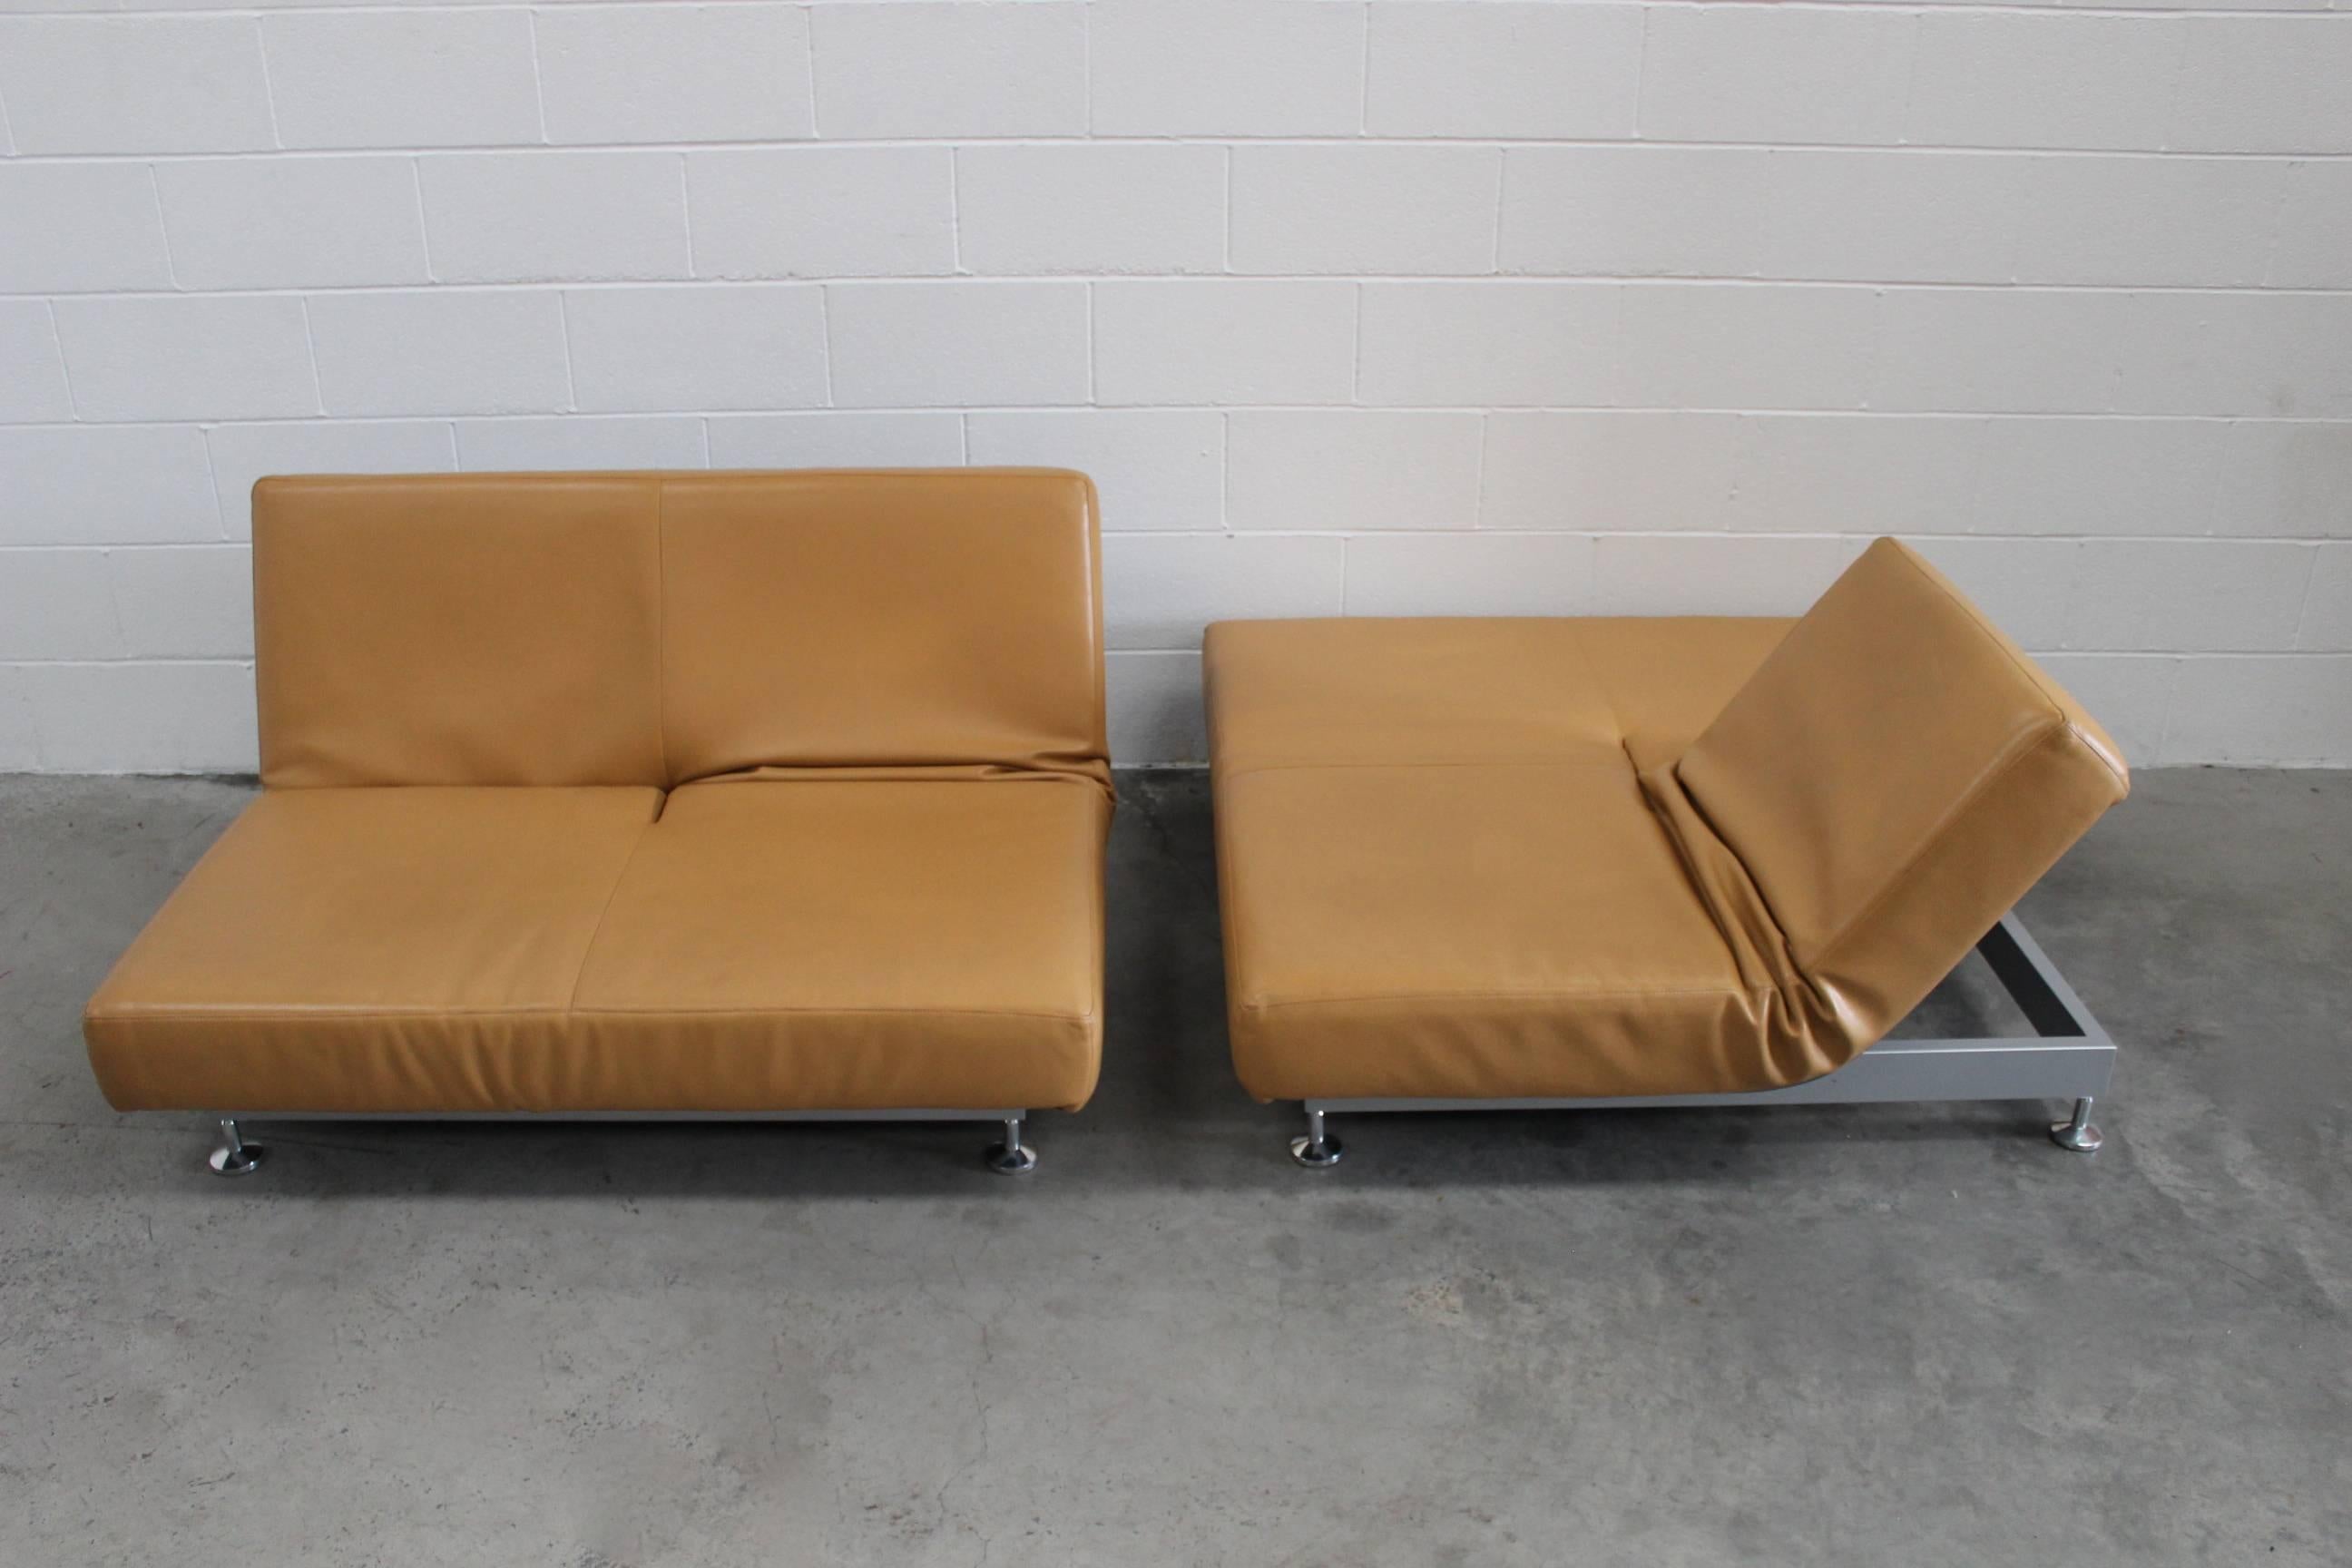 Pair of Edra “Damier” Sofa or Chaise Units in Tan Leather by Francesco Binafare In Excellent Condition In Barrowford, GB